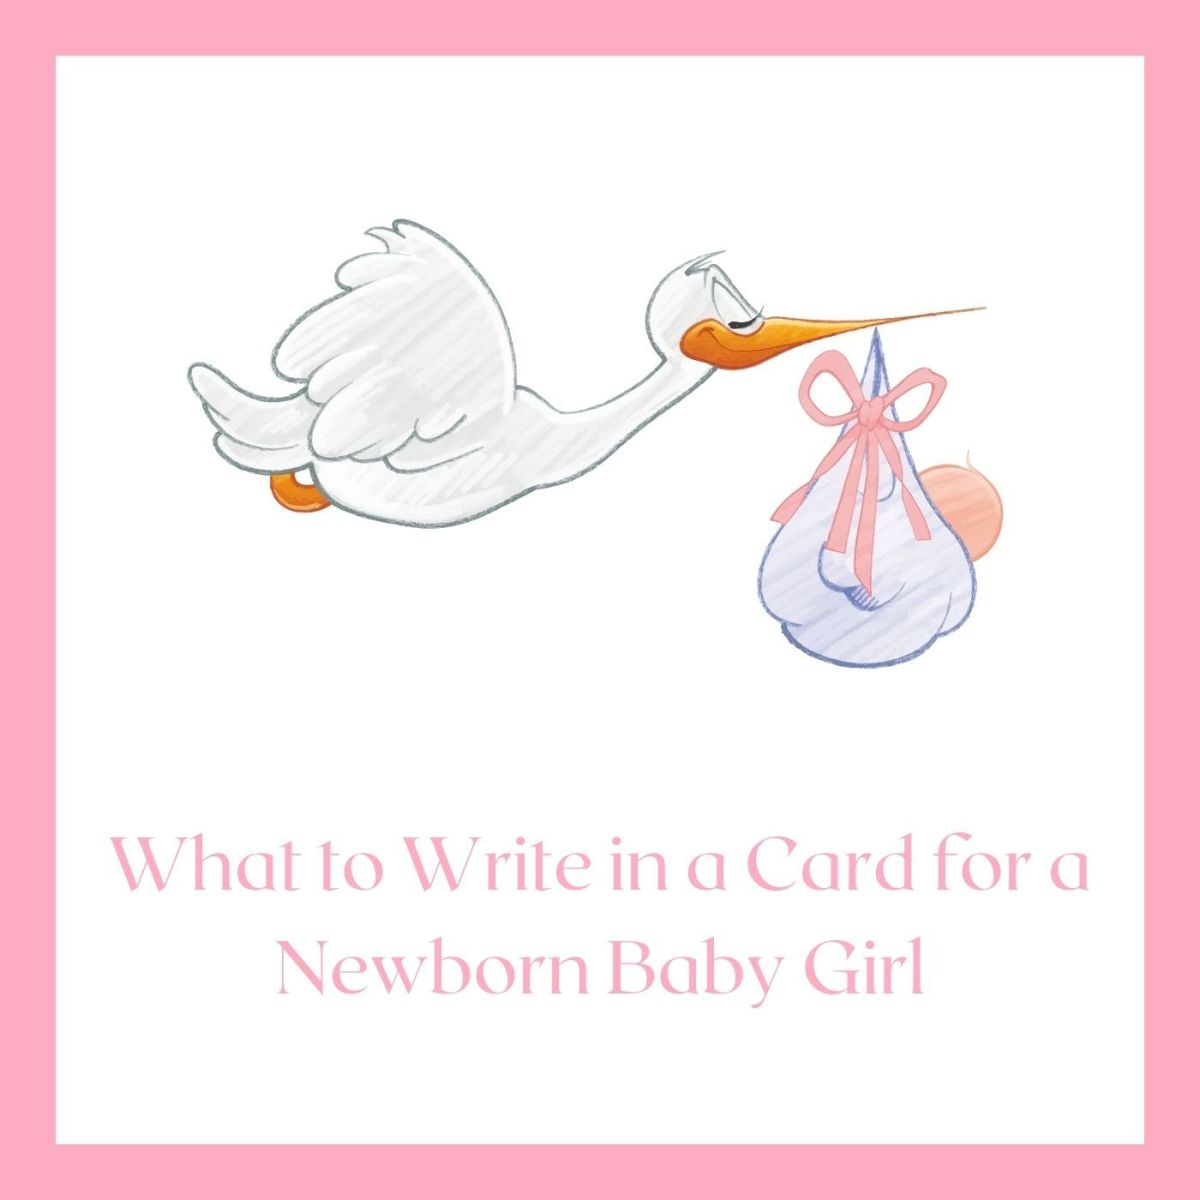 What to Write in a Card for a Newborn Baby Girl